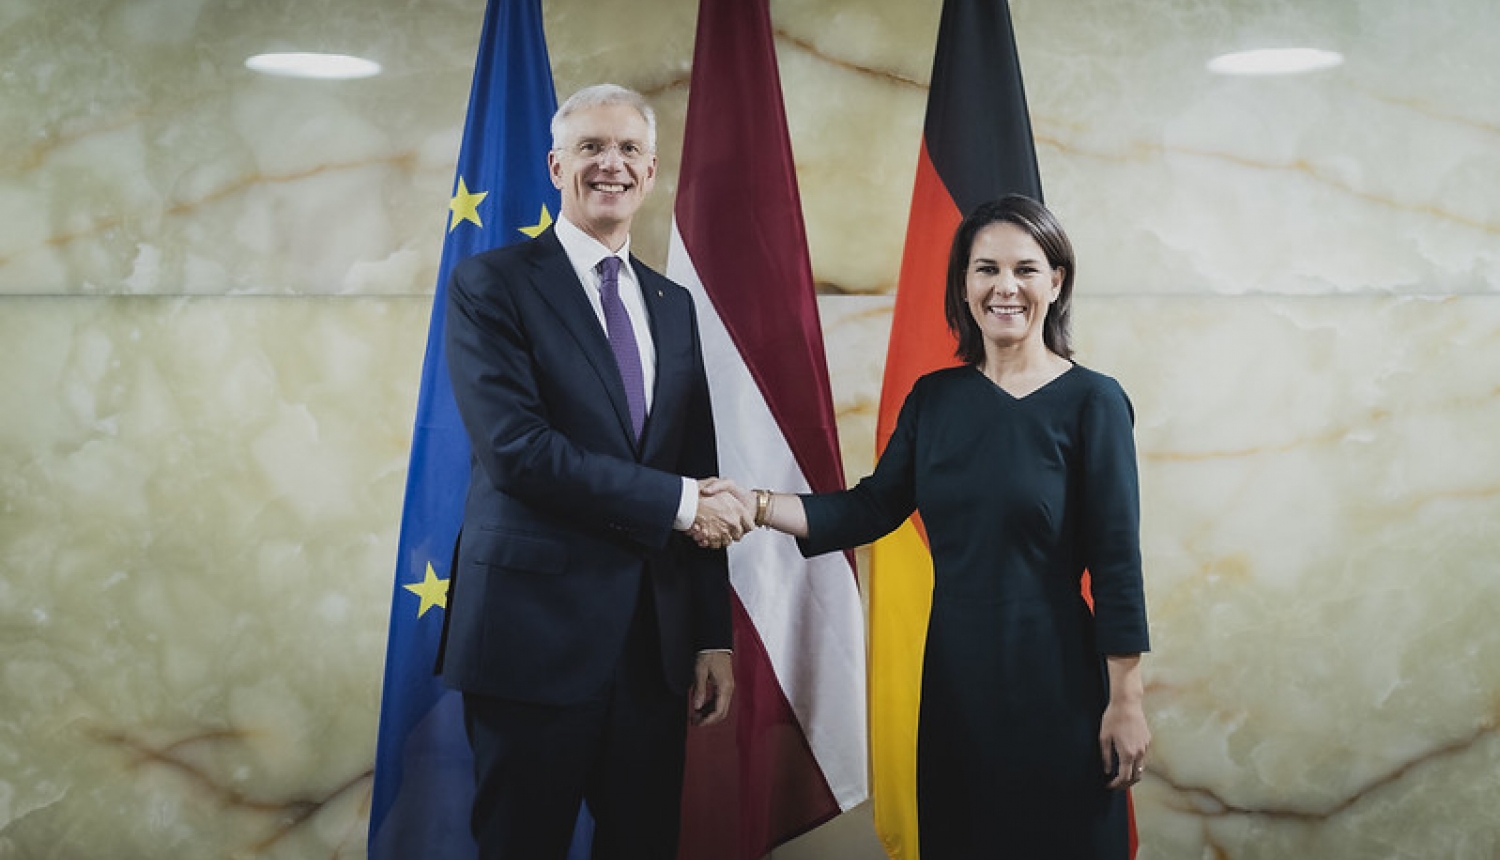 Minister of Foreign Affairs, Krišjānis Kariņš, meeting with the Minister of Foreign Affairs of the Federal Republic of Germany, Annalena Baerbock